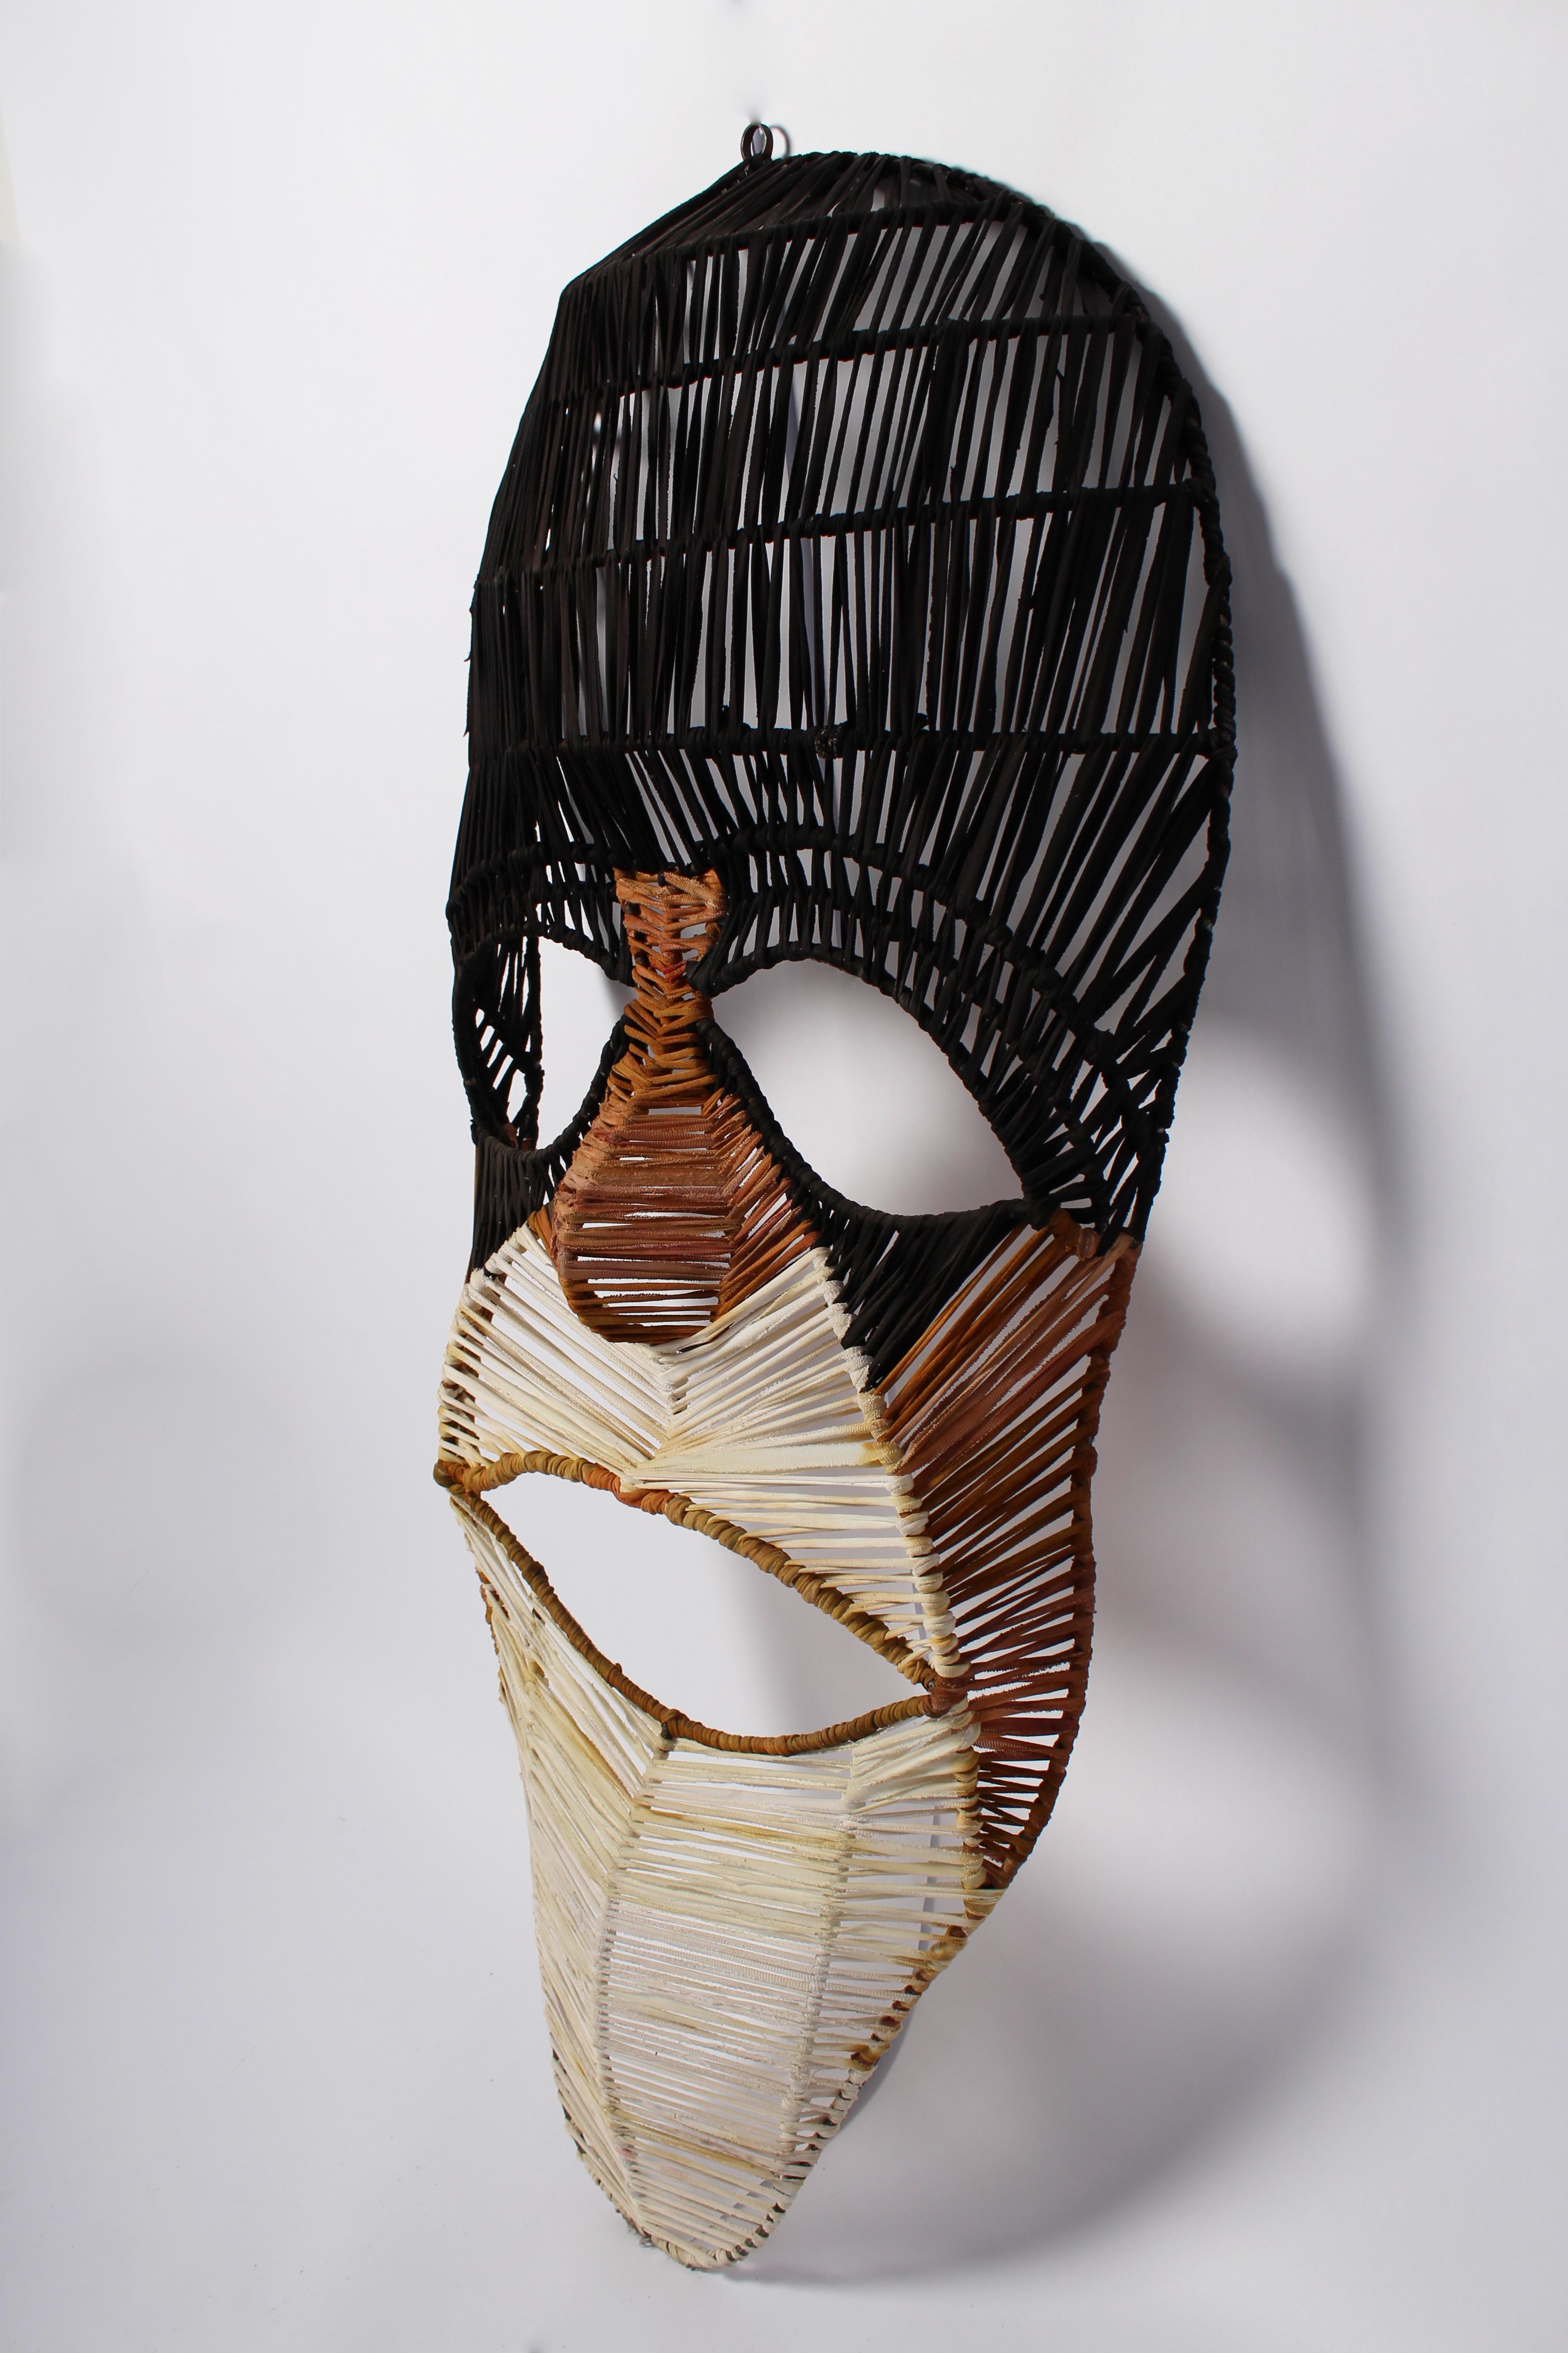 Telling my Story 1, Elisia Nghidishange, Mixed media sculpture For Sale 1